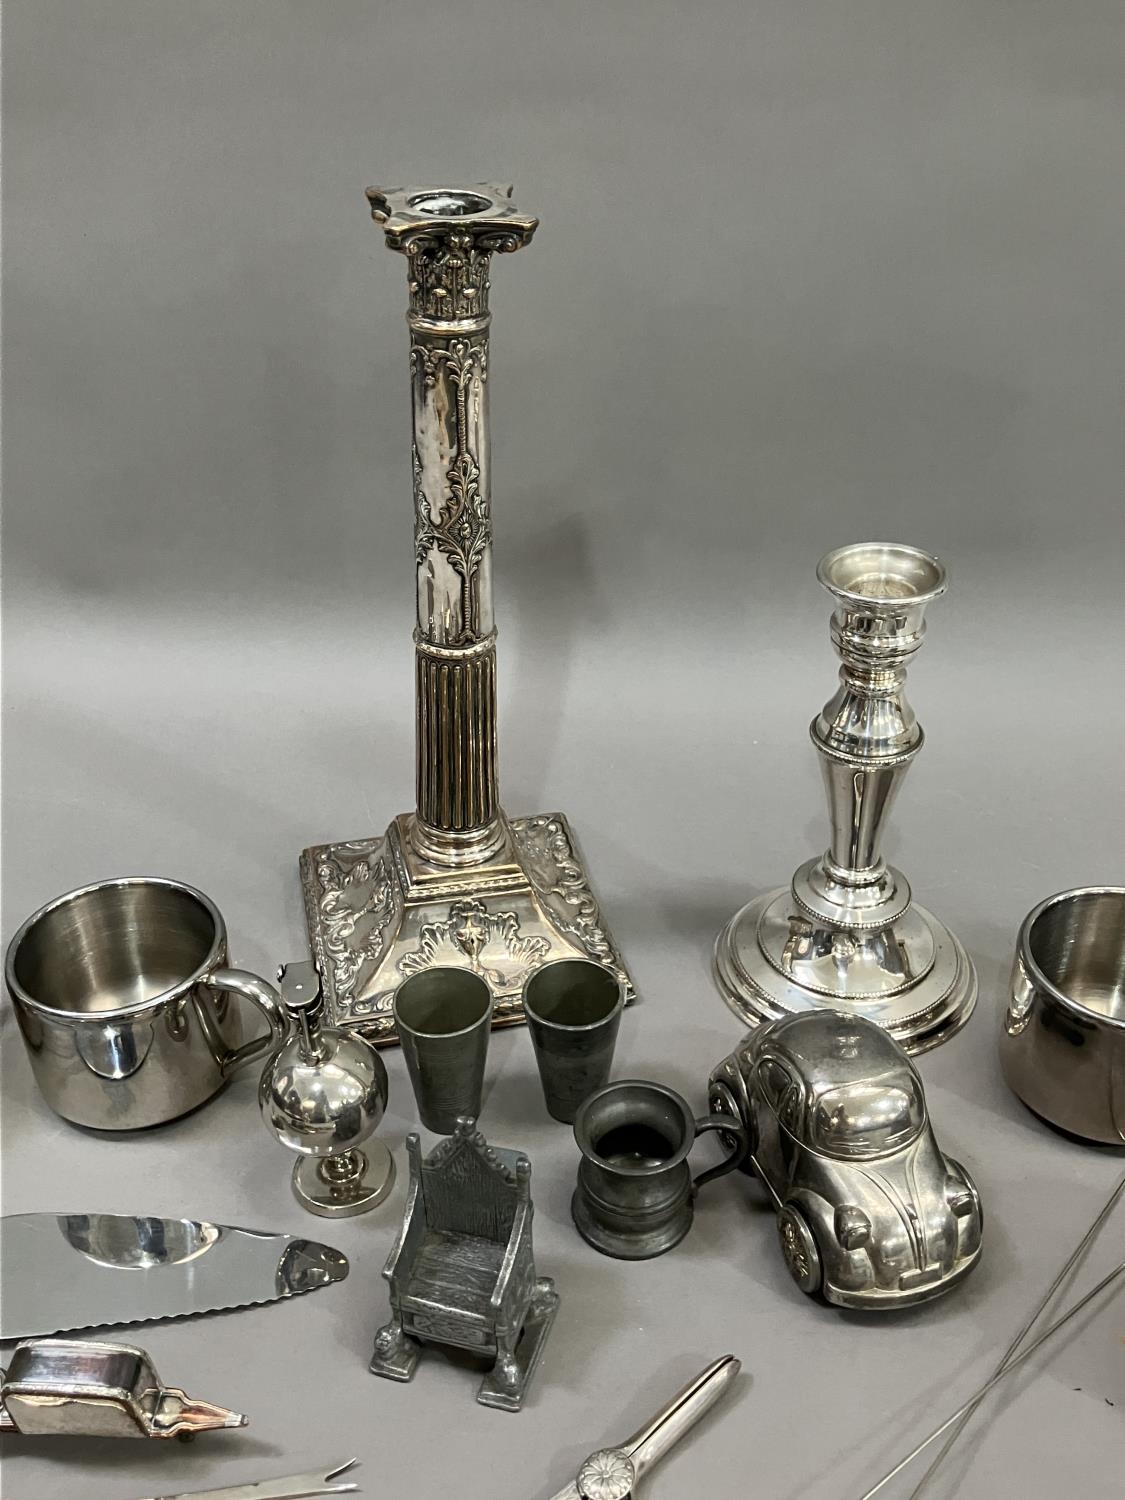 A moulded silver plate on copper candlestick, another silver plate candlestick, two pairs of - Image 2 of 2